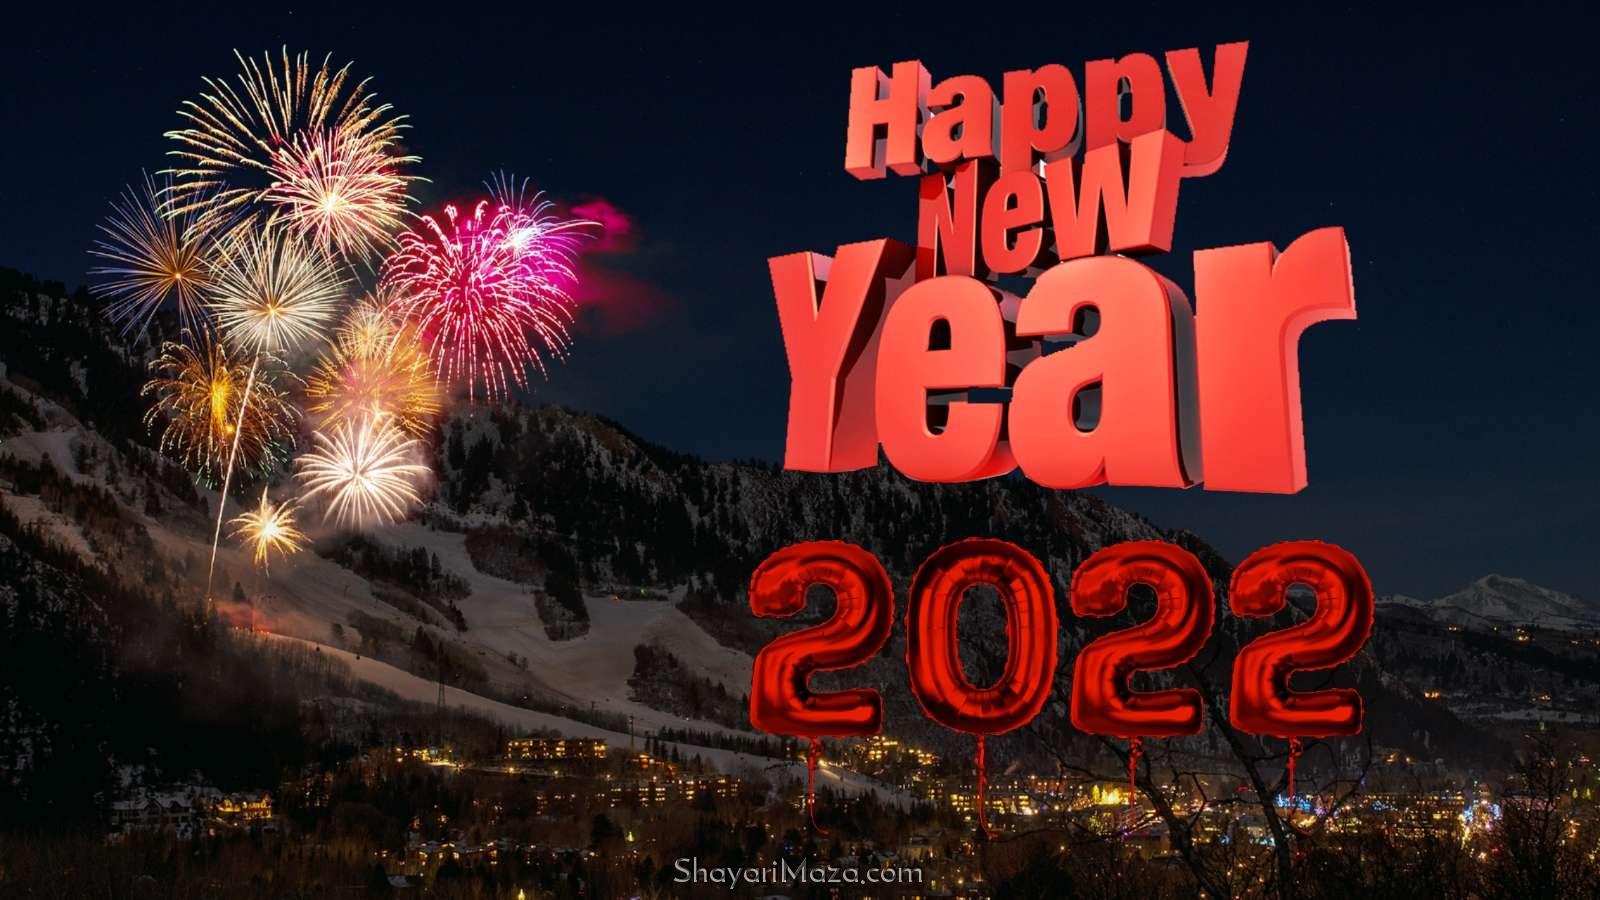 Free Happy New Year 2022 Images Download